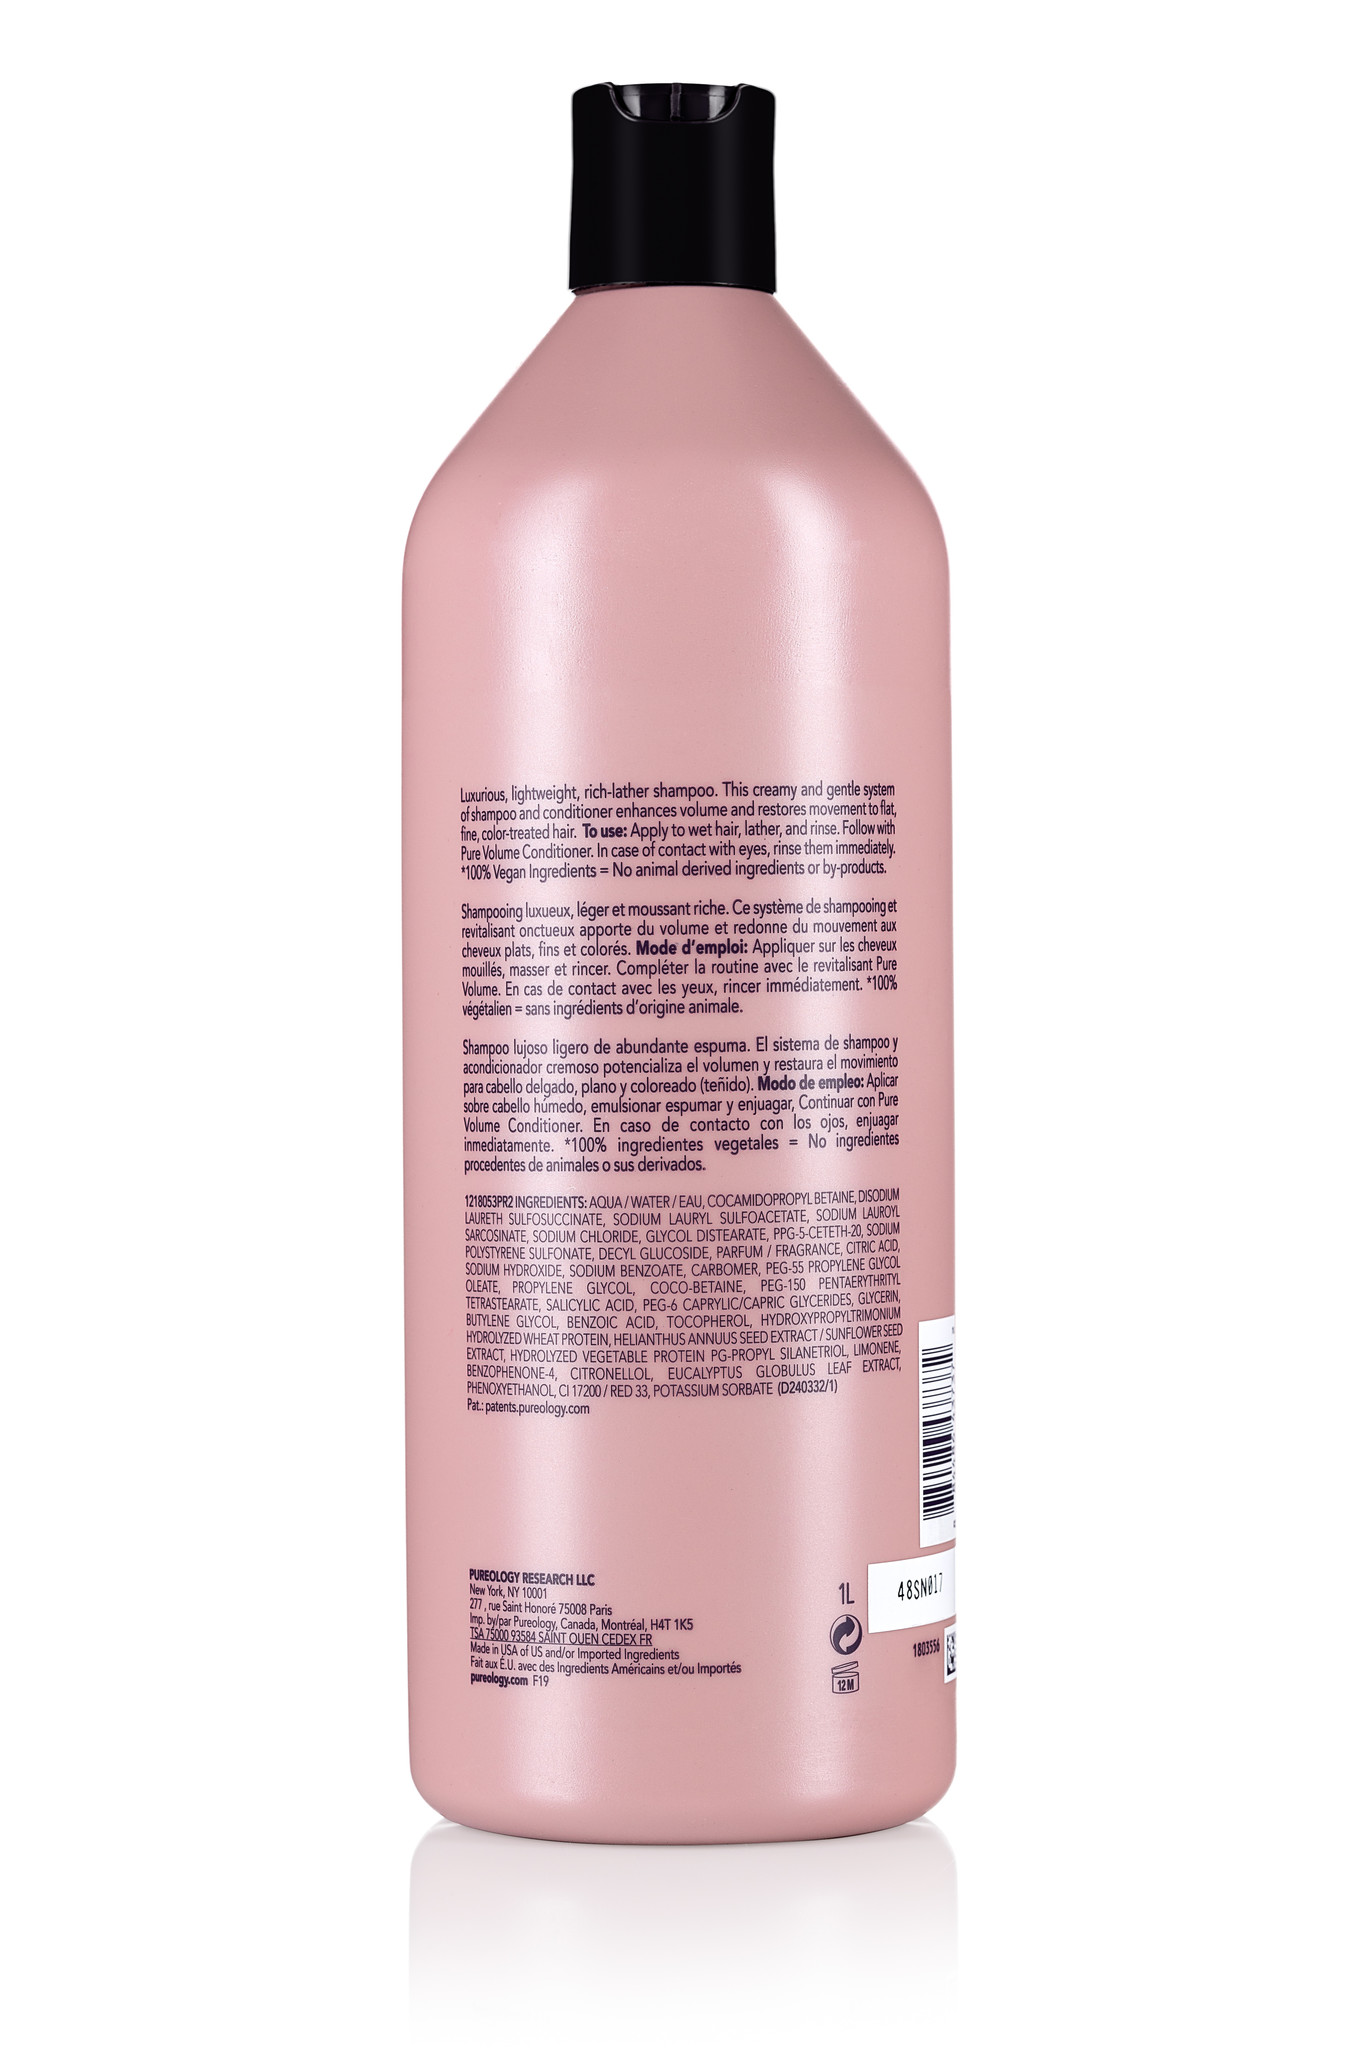 PURE VOLUME Shampooing - Industria Coiffure Hair Products